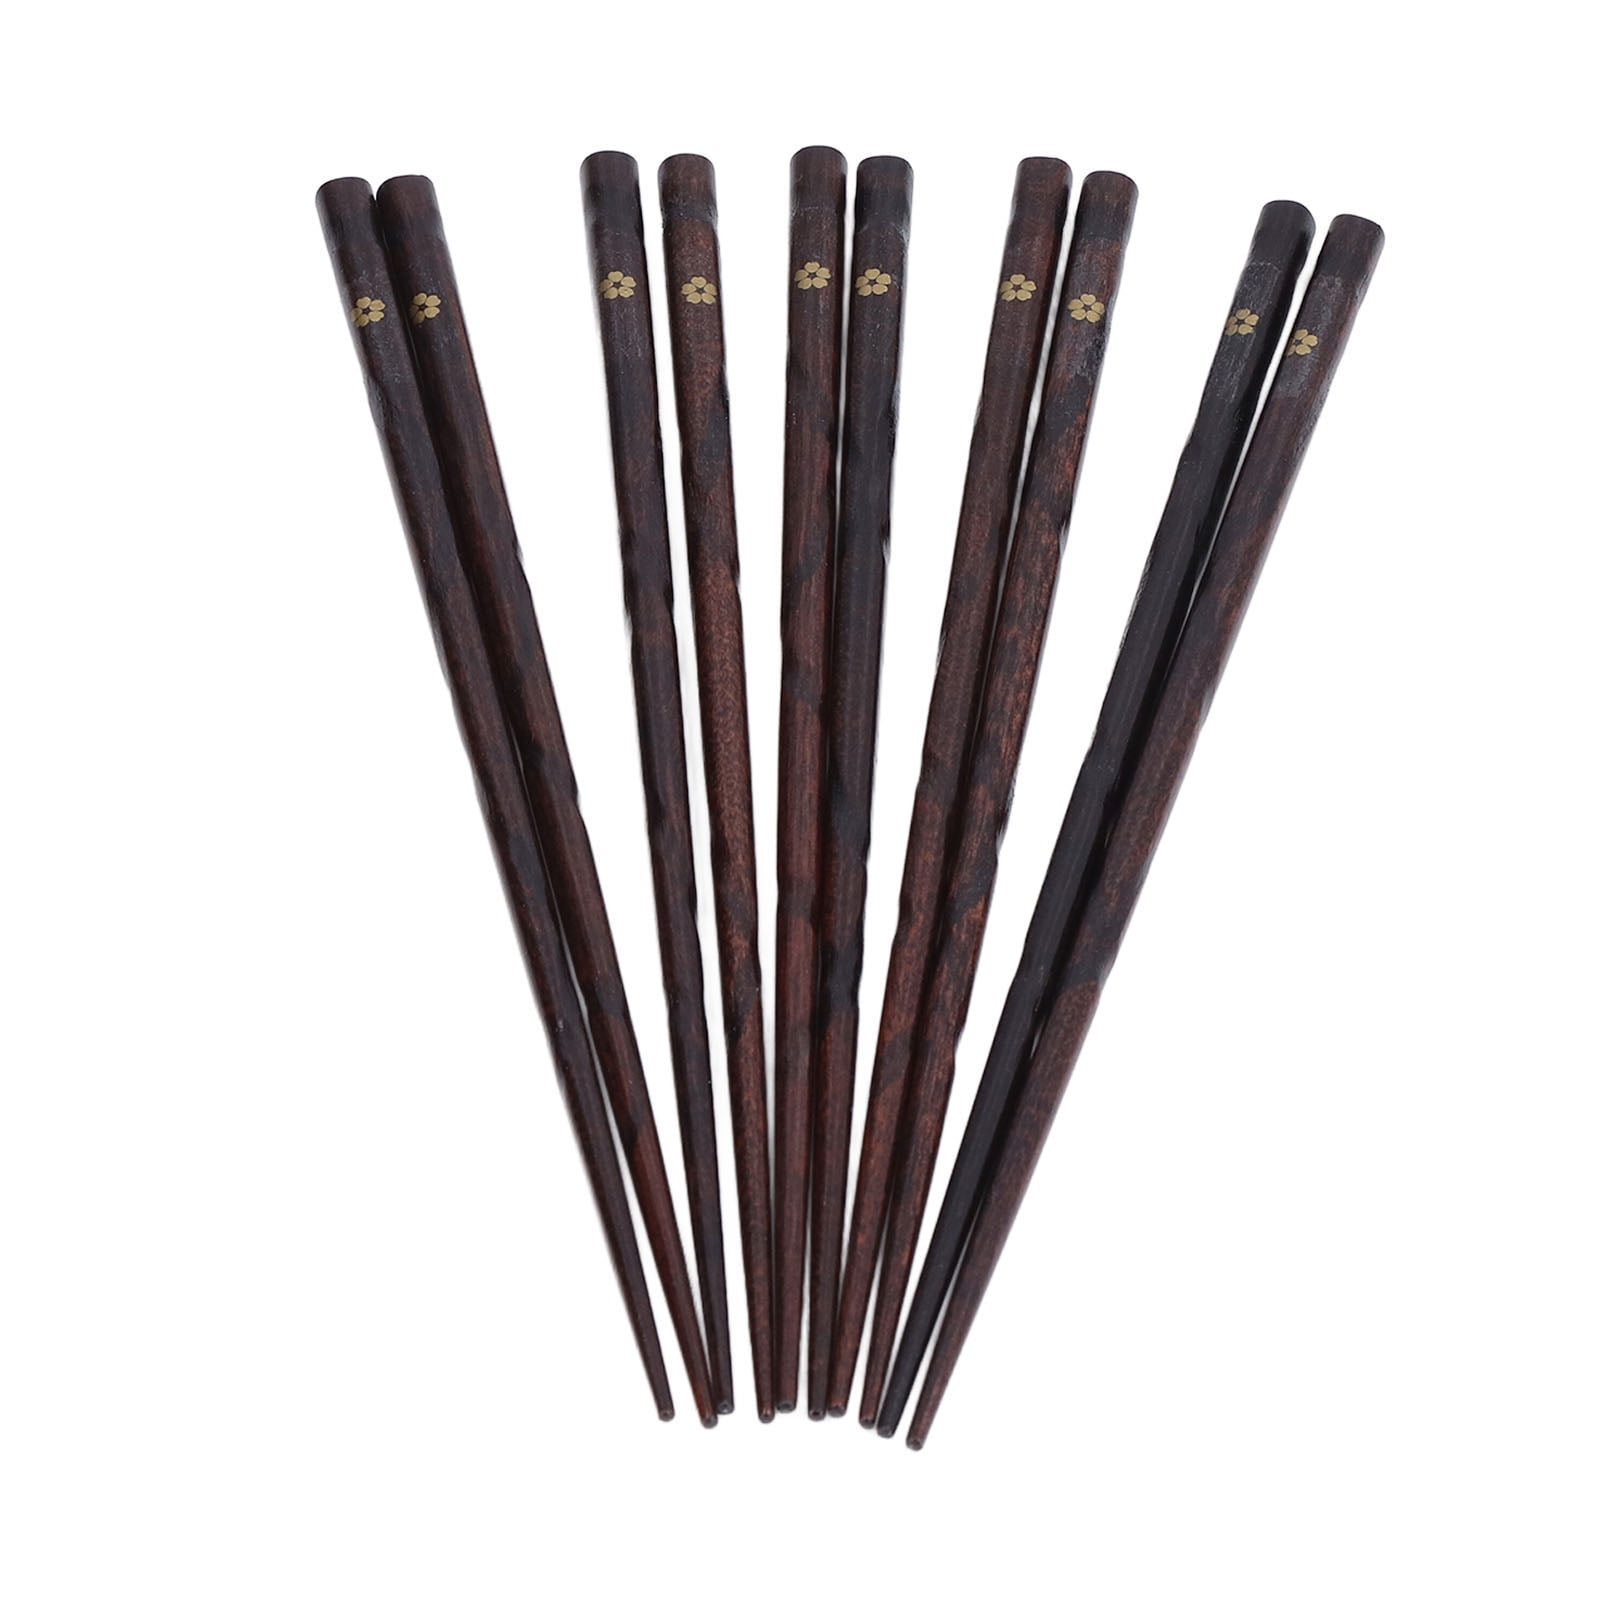 Chopsticks 5 pairs Japanese lady traditional flower wood bamboo pack gift NEW 